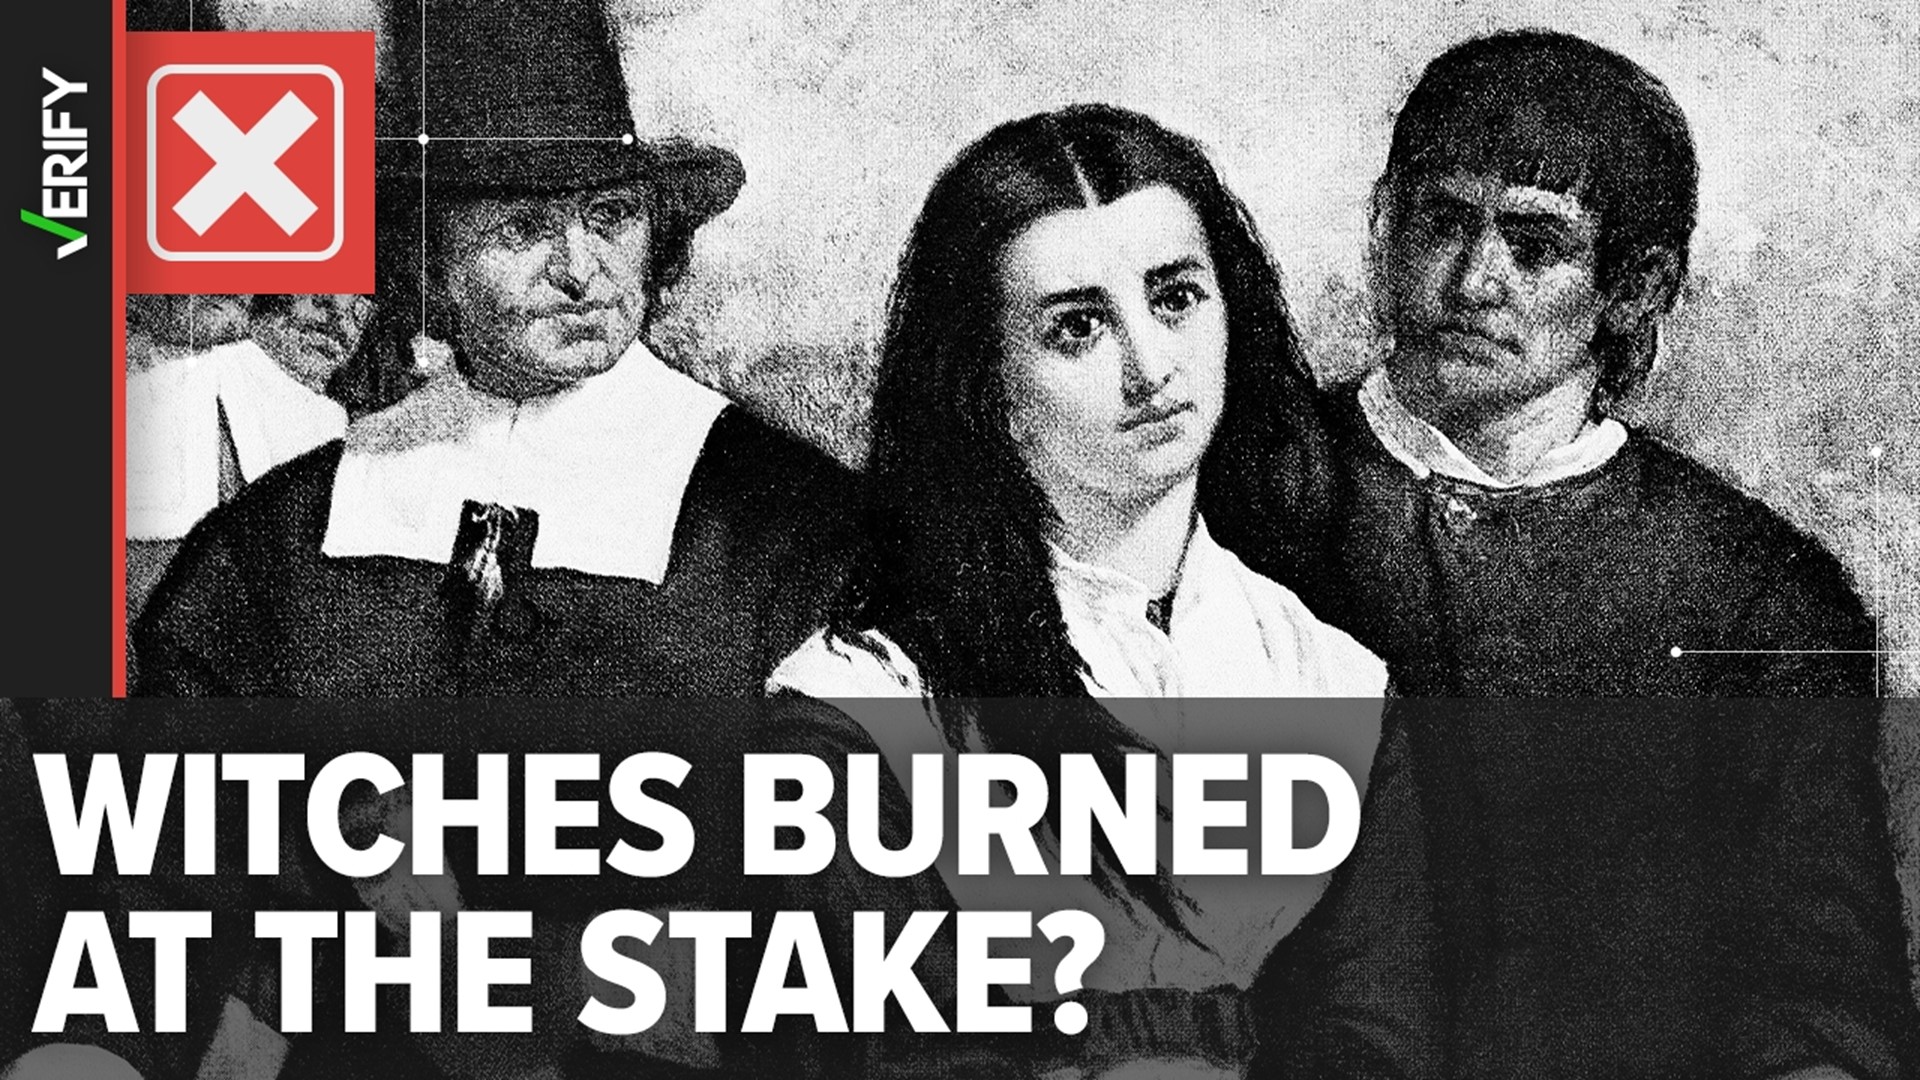 Contrary to popular belief, accused witches were hanged, not burned at the stake, in Salem, Massachusetts, and other parts of colonial New England.